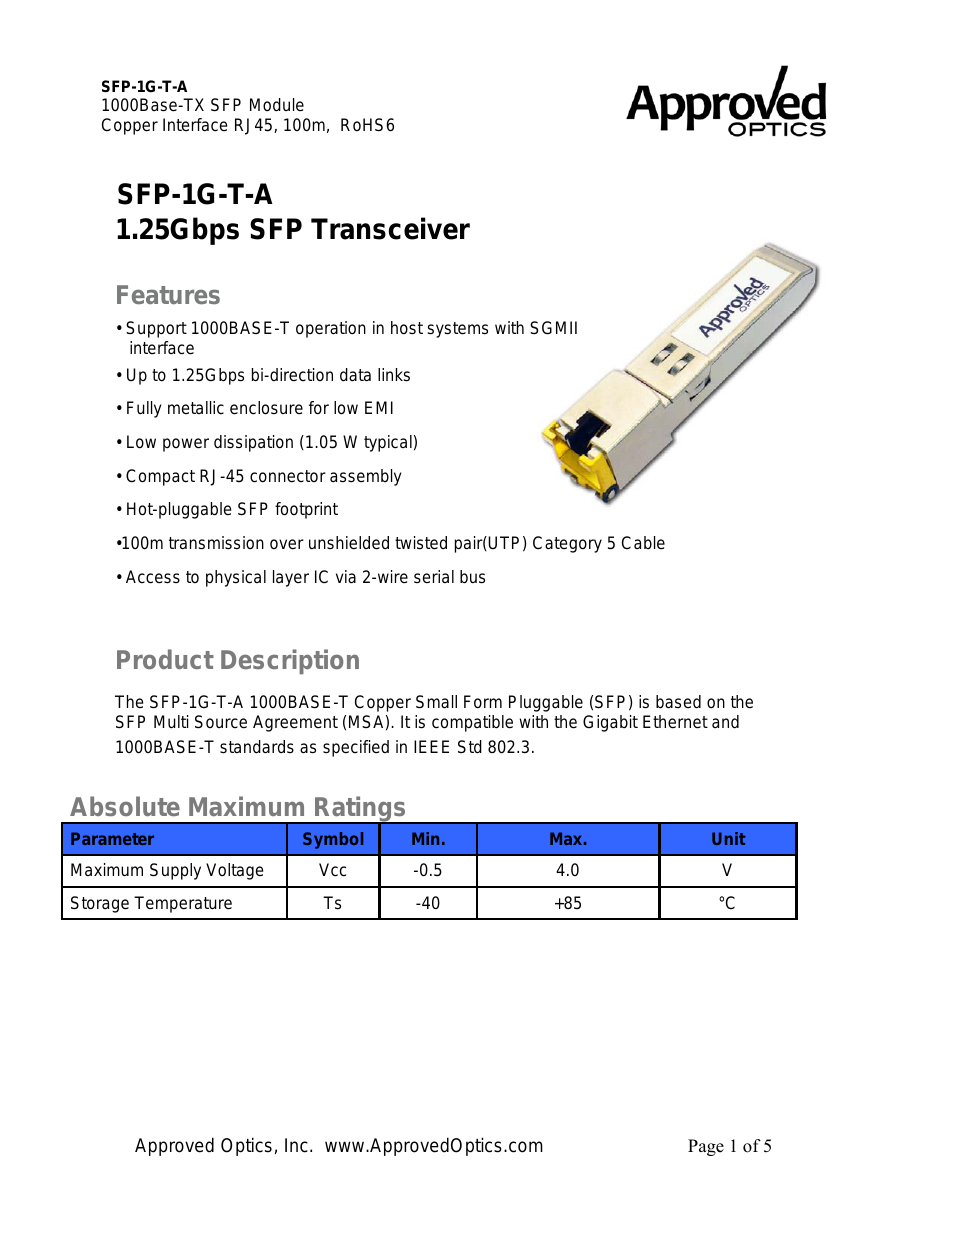 Approved ARISTA SFP-1G-T